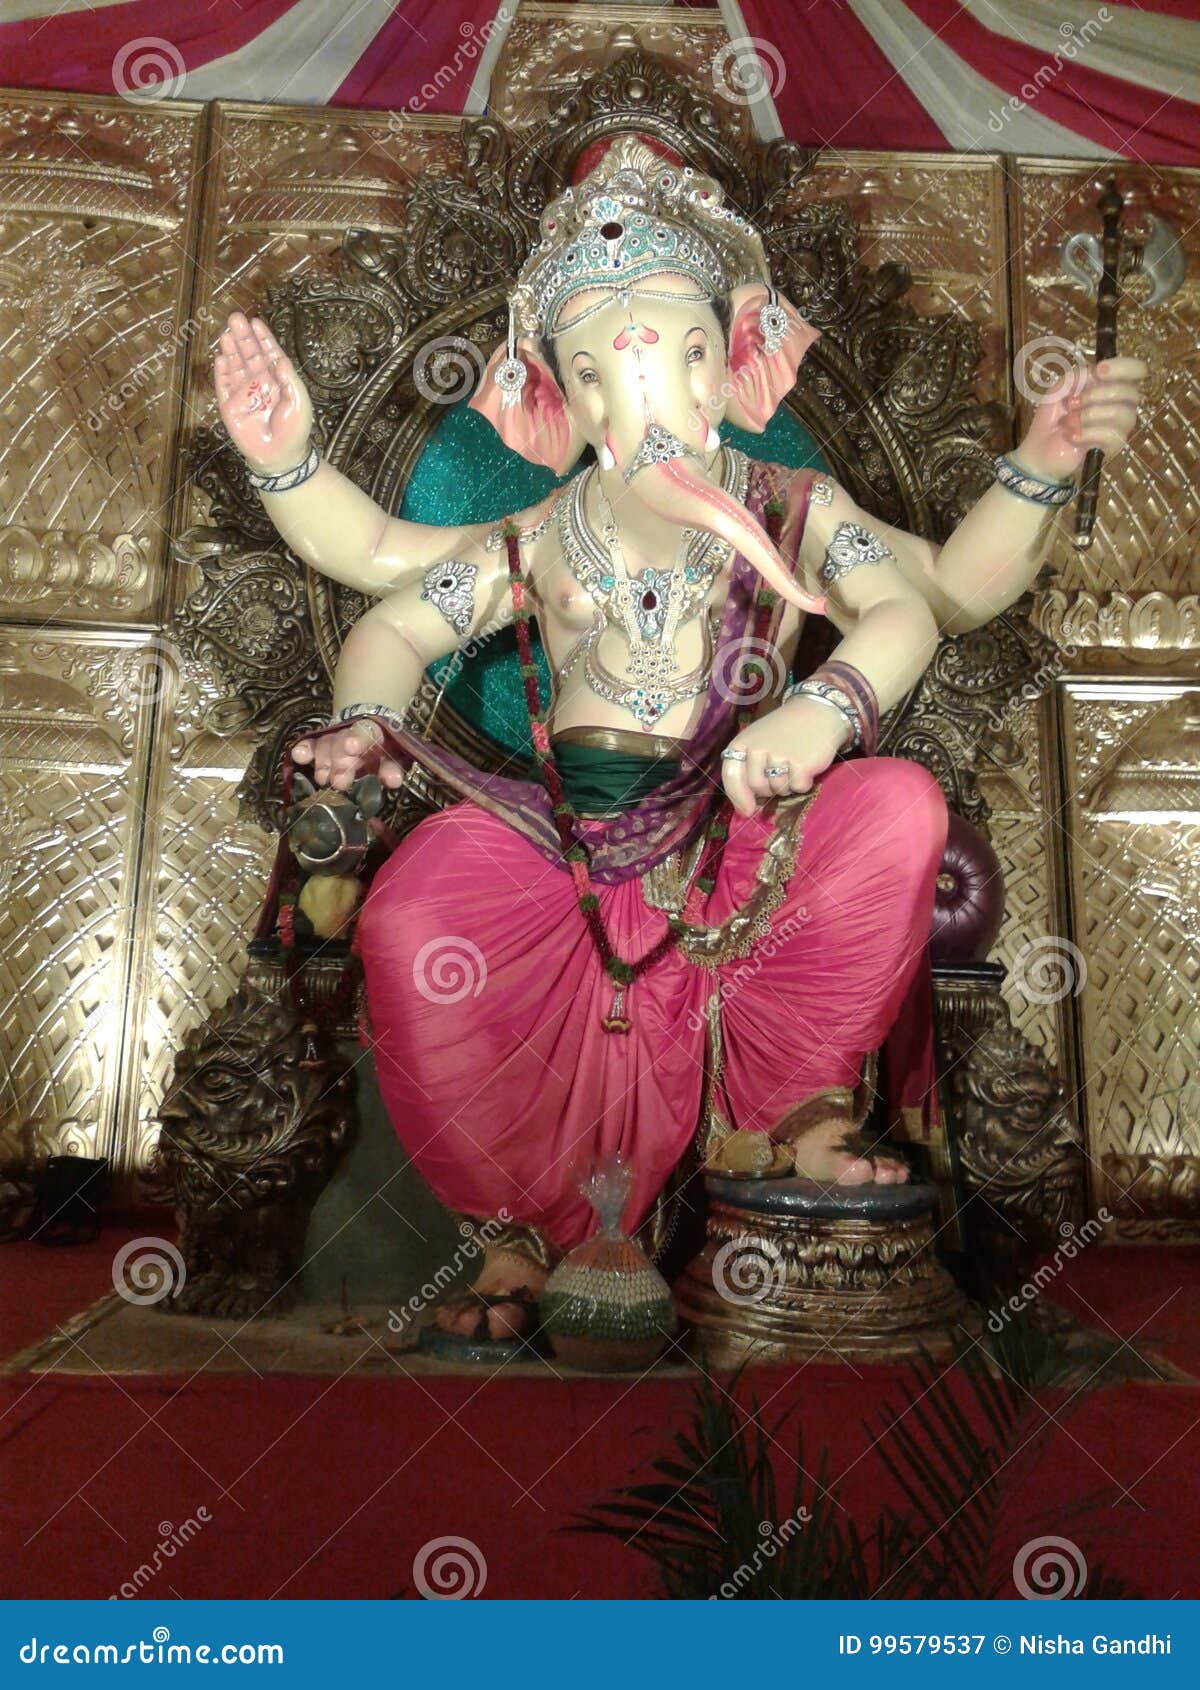 Lord Ganesha in India Festivals Stock Image - Image of tradition ...